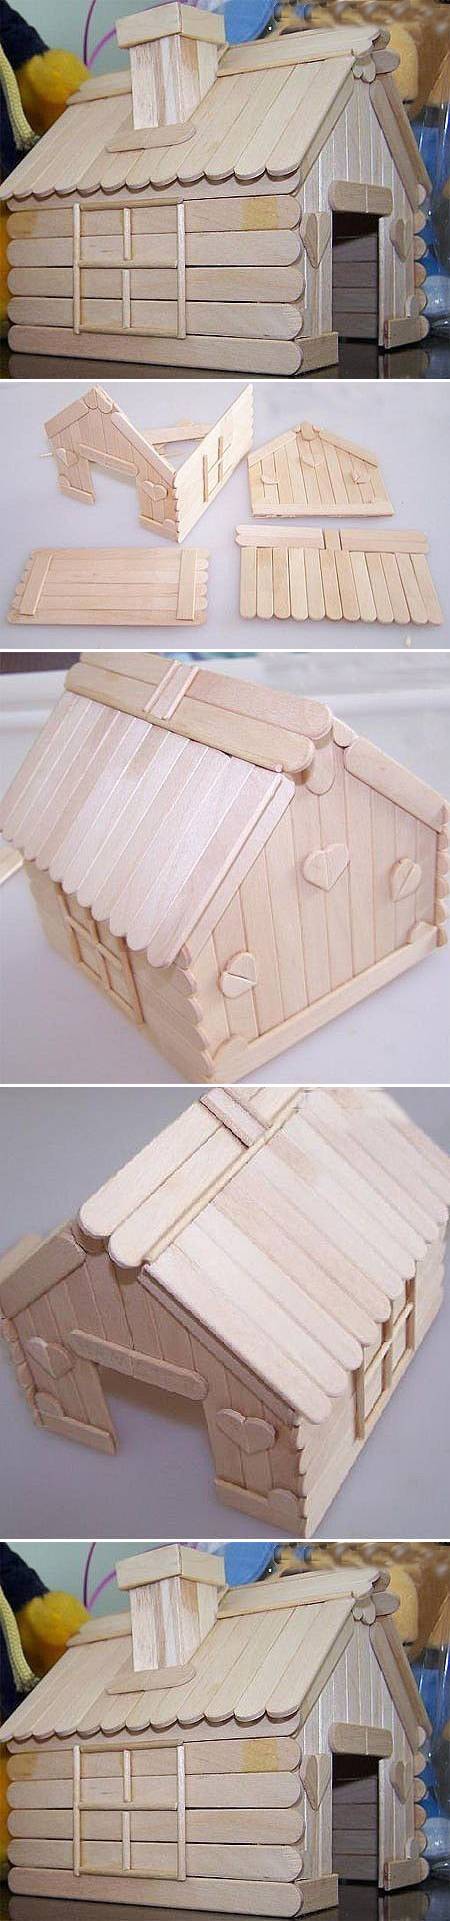 ideas to recycle popsicle sticks